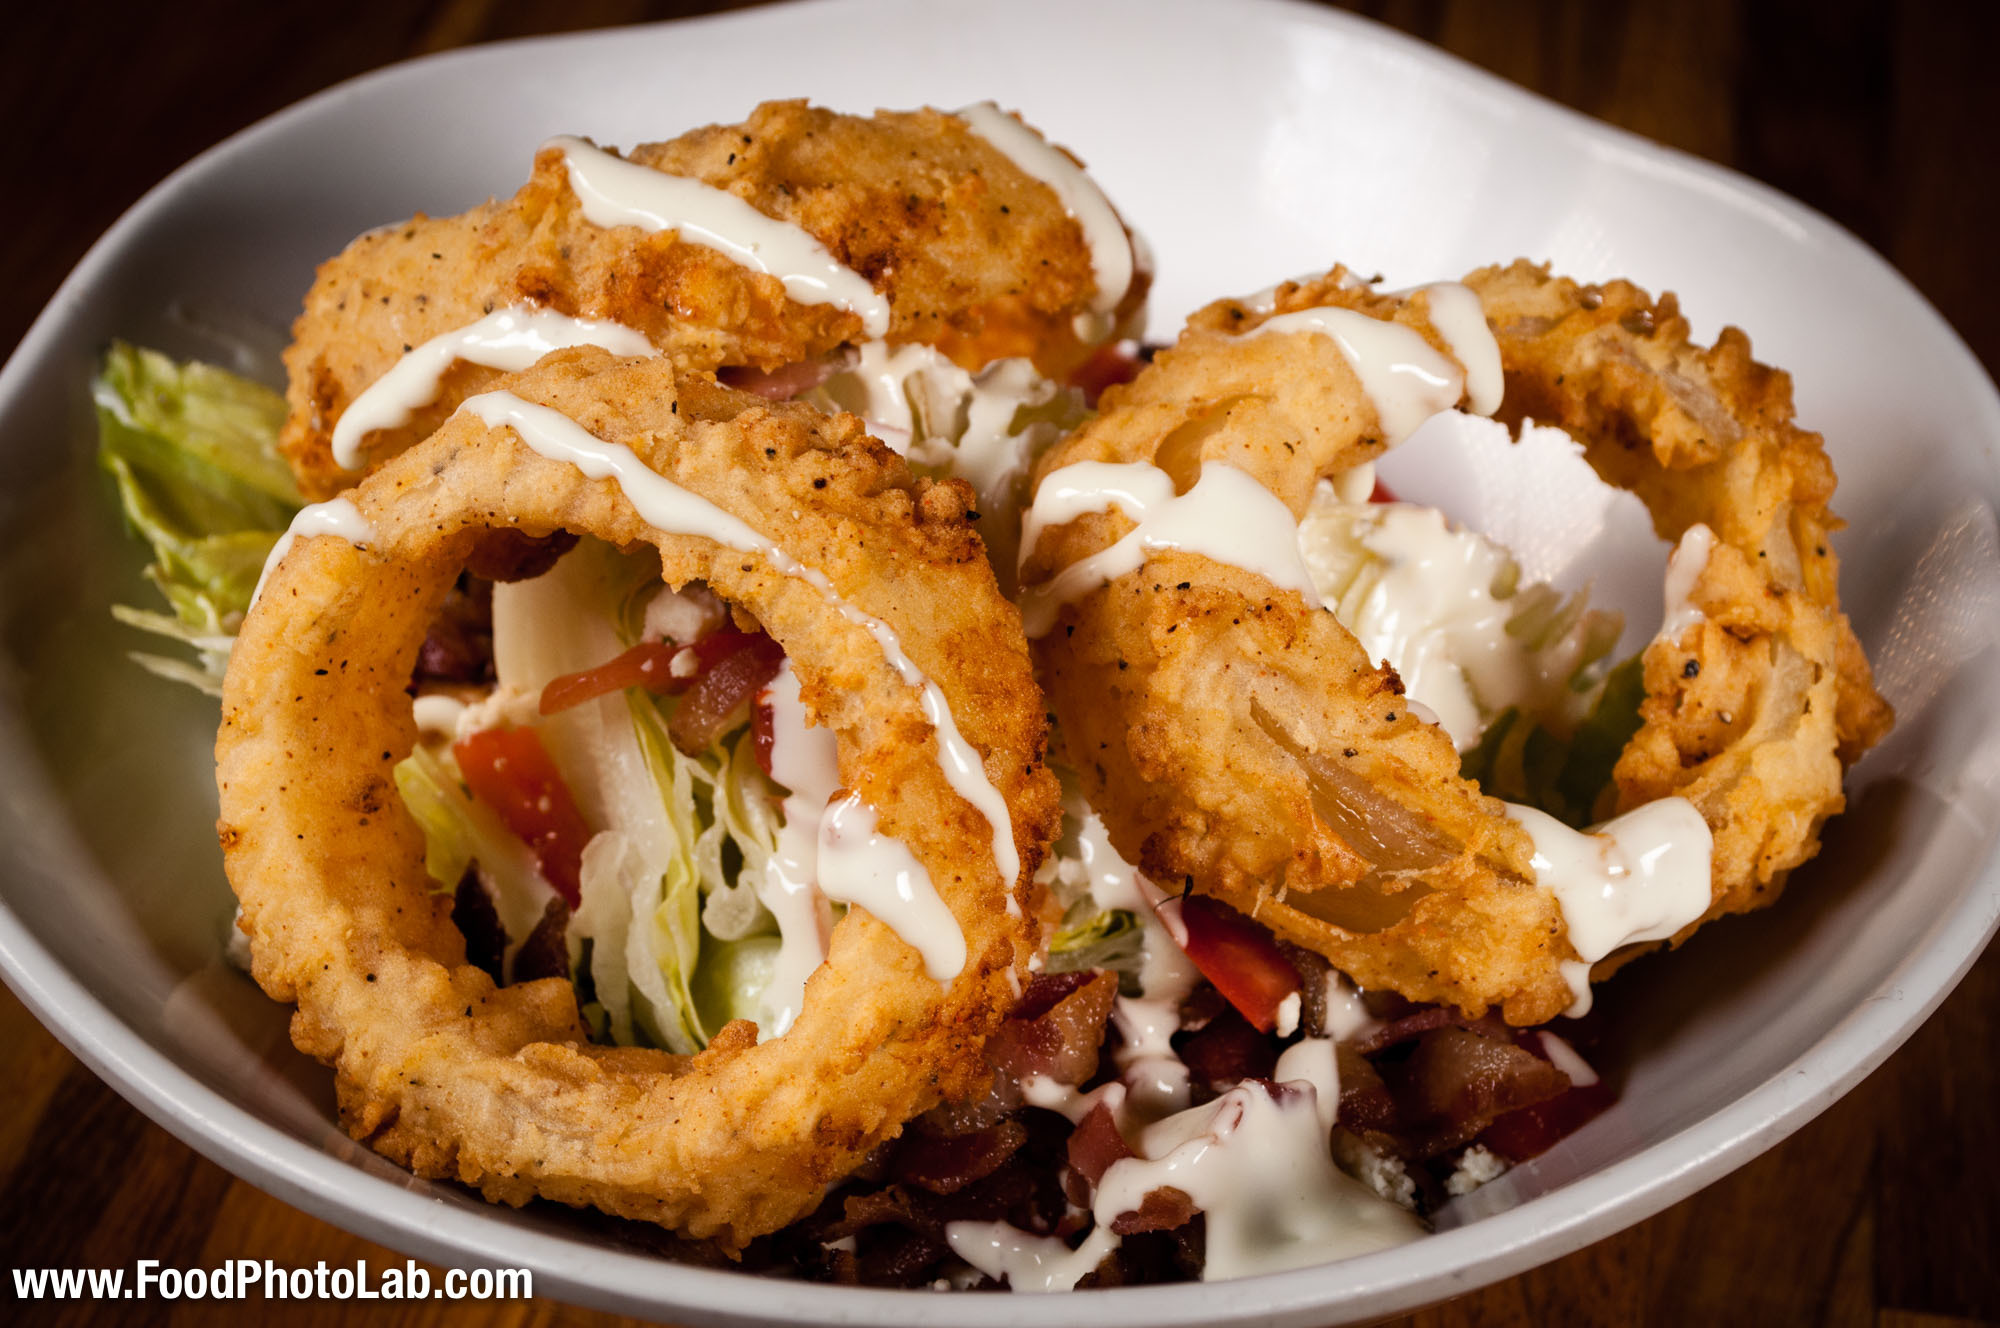 czar salad  topped with onion rings